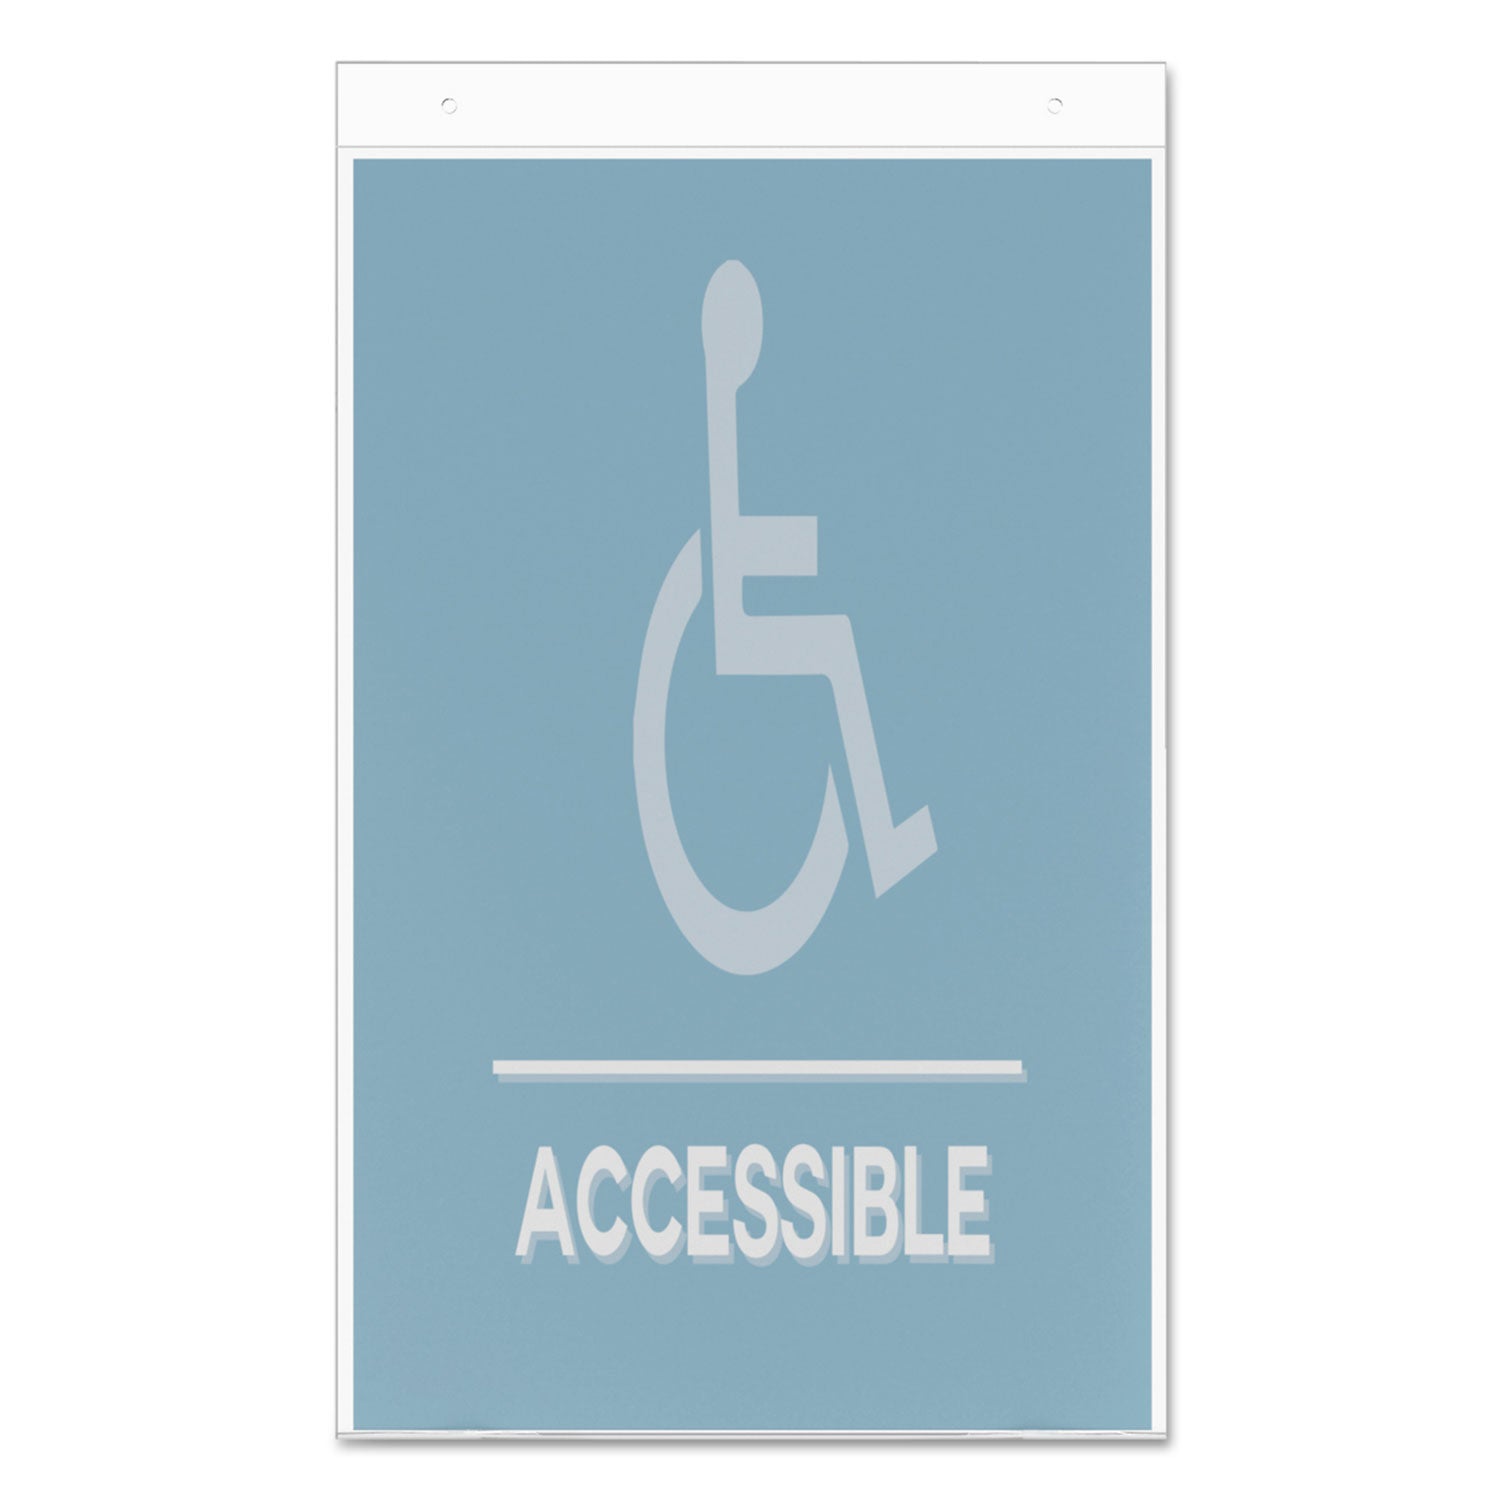 classic-image-single-sided-wall-sign-holder-plastic-11-x-17-insert-clear_def68001 - 4